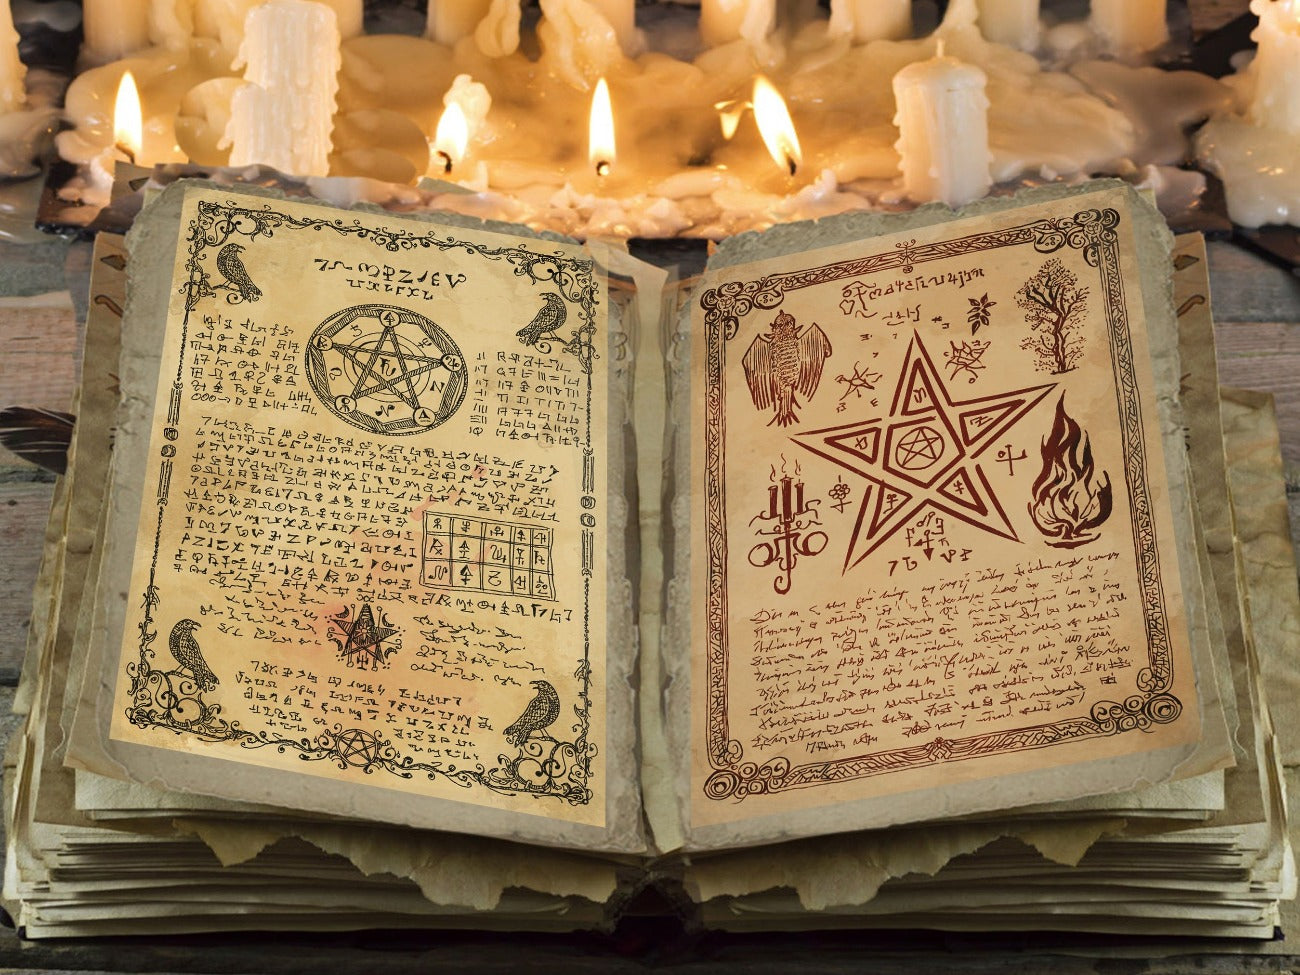 MYSTIC OCCULT, Digital Gothic Pages, show placed in an ancient witchcraft grimoire - Morgana Magick Spell